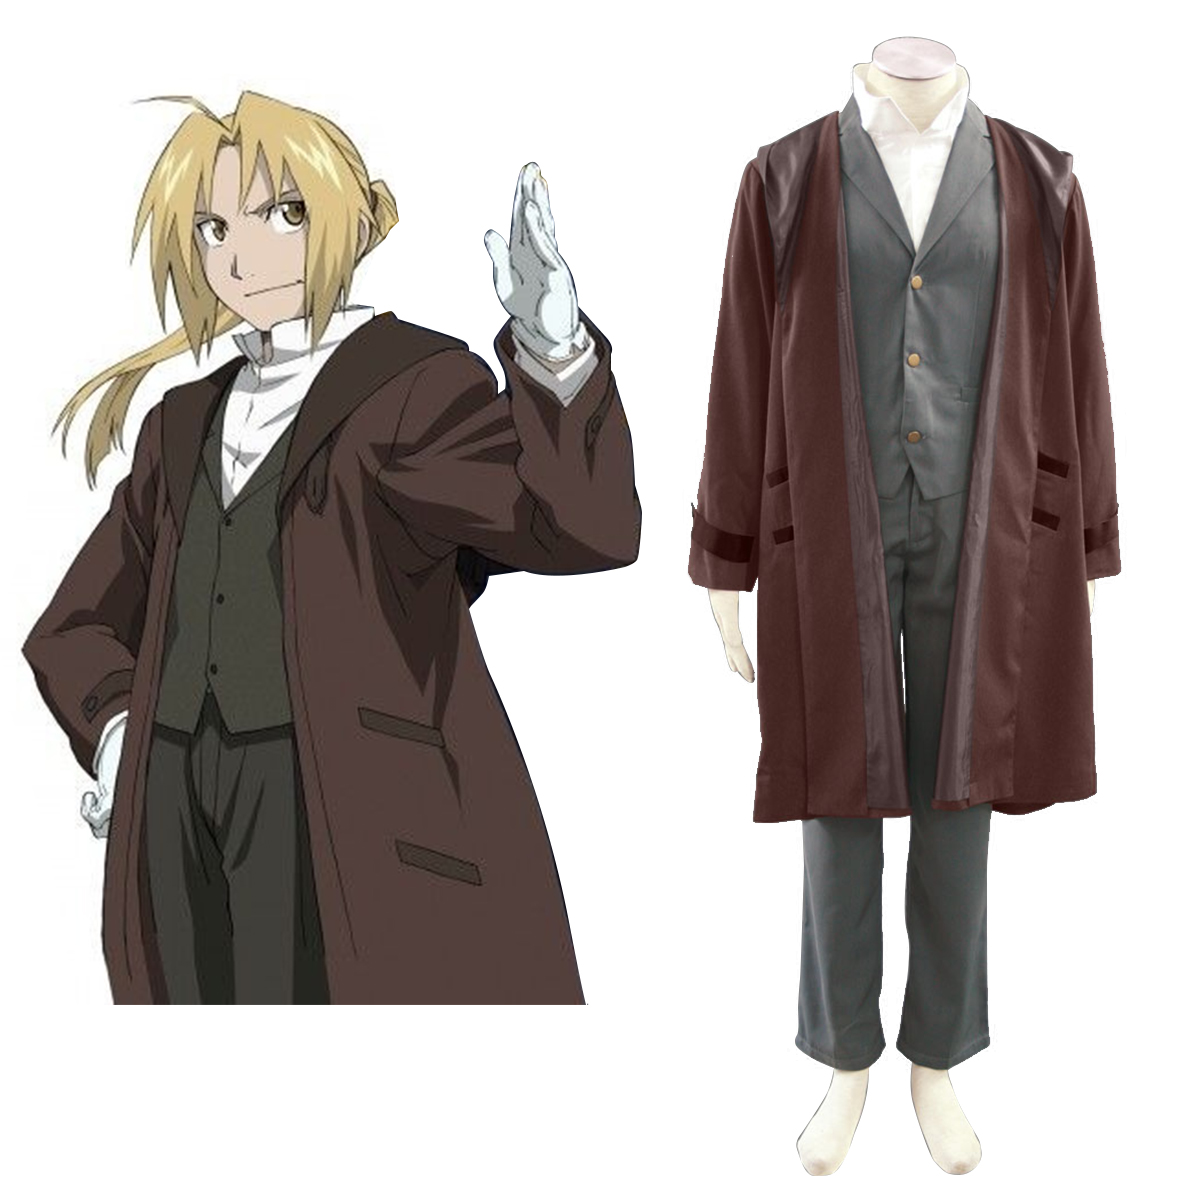 Fullmetal Alchemist Edward Elric Anime Cosplay Costumes Outfit